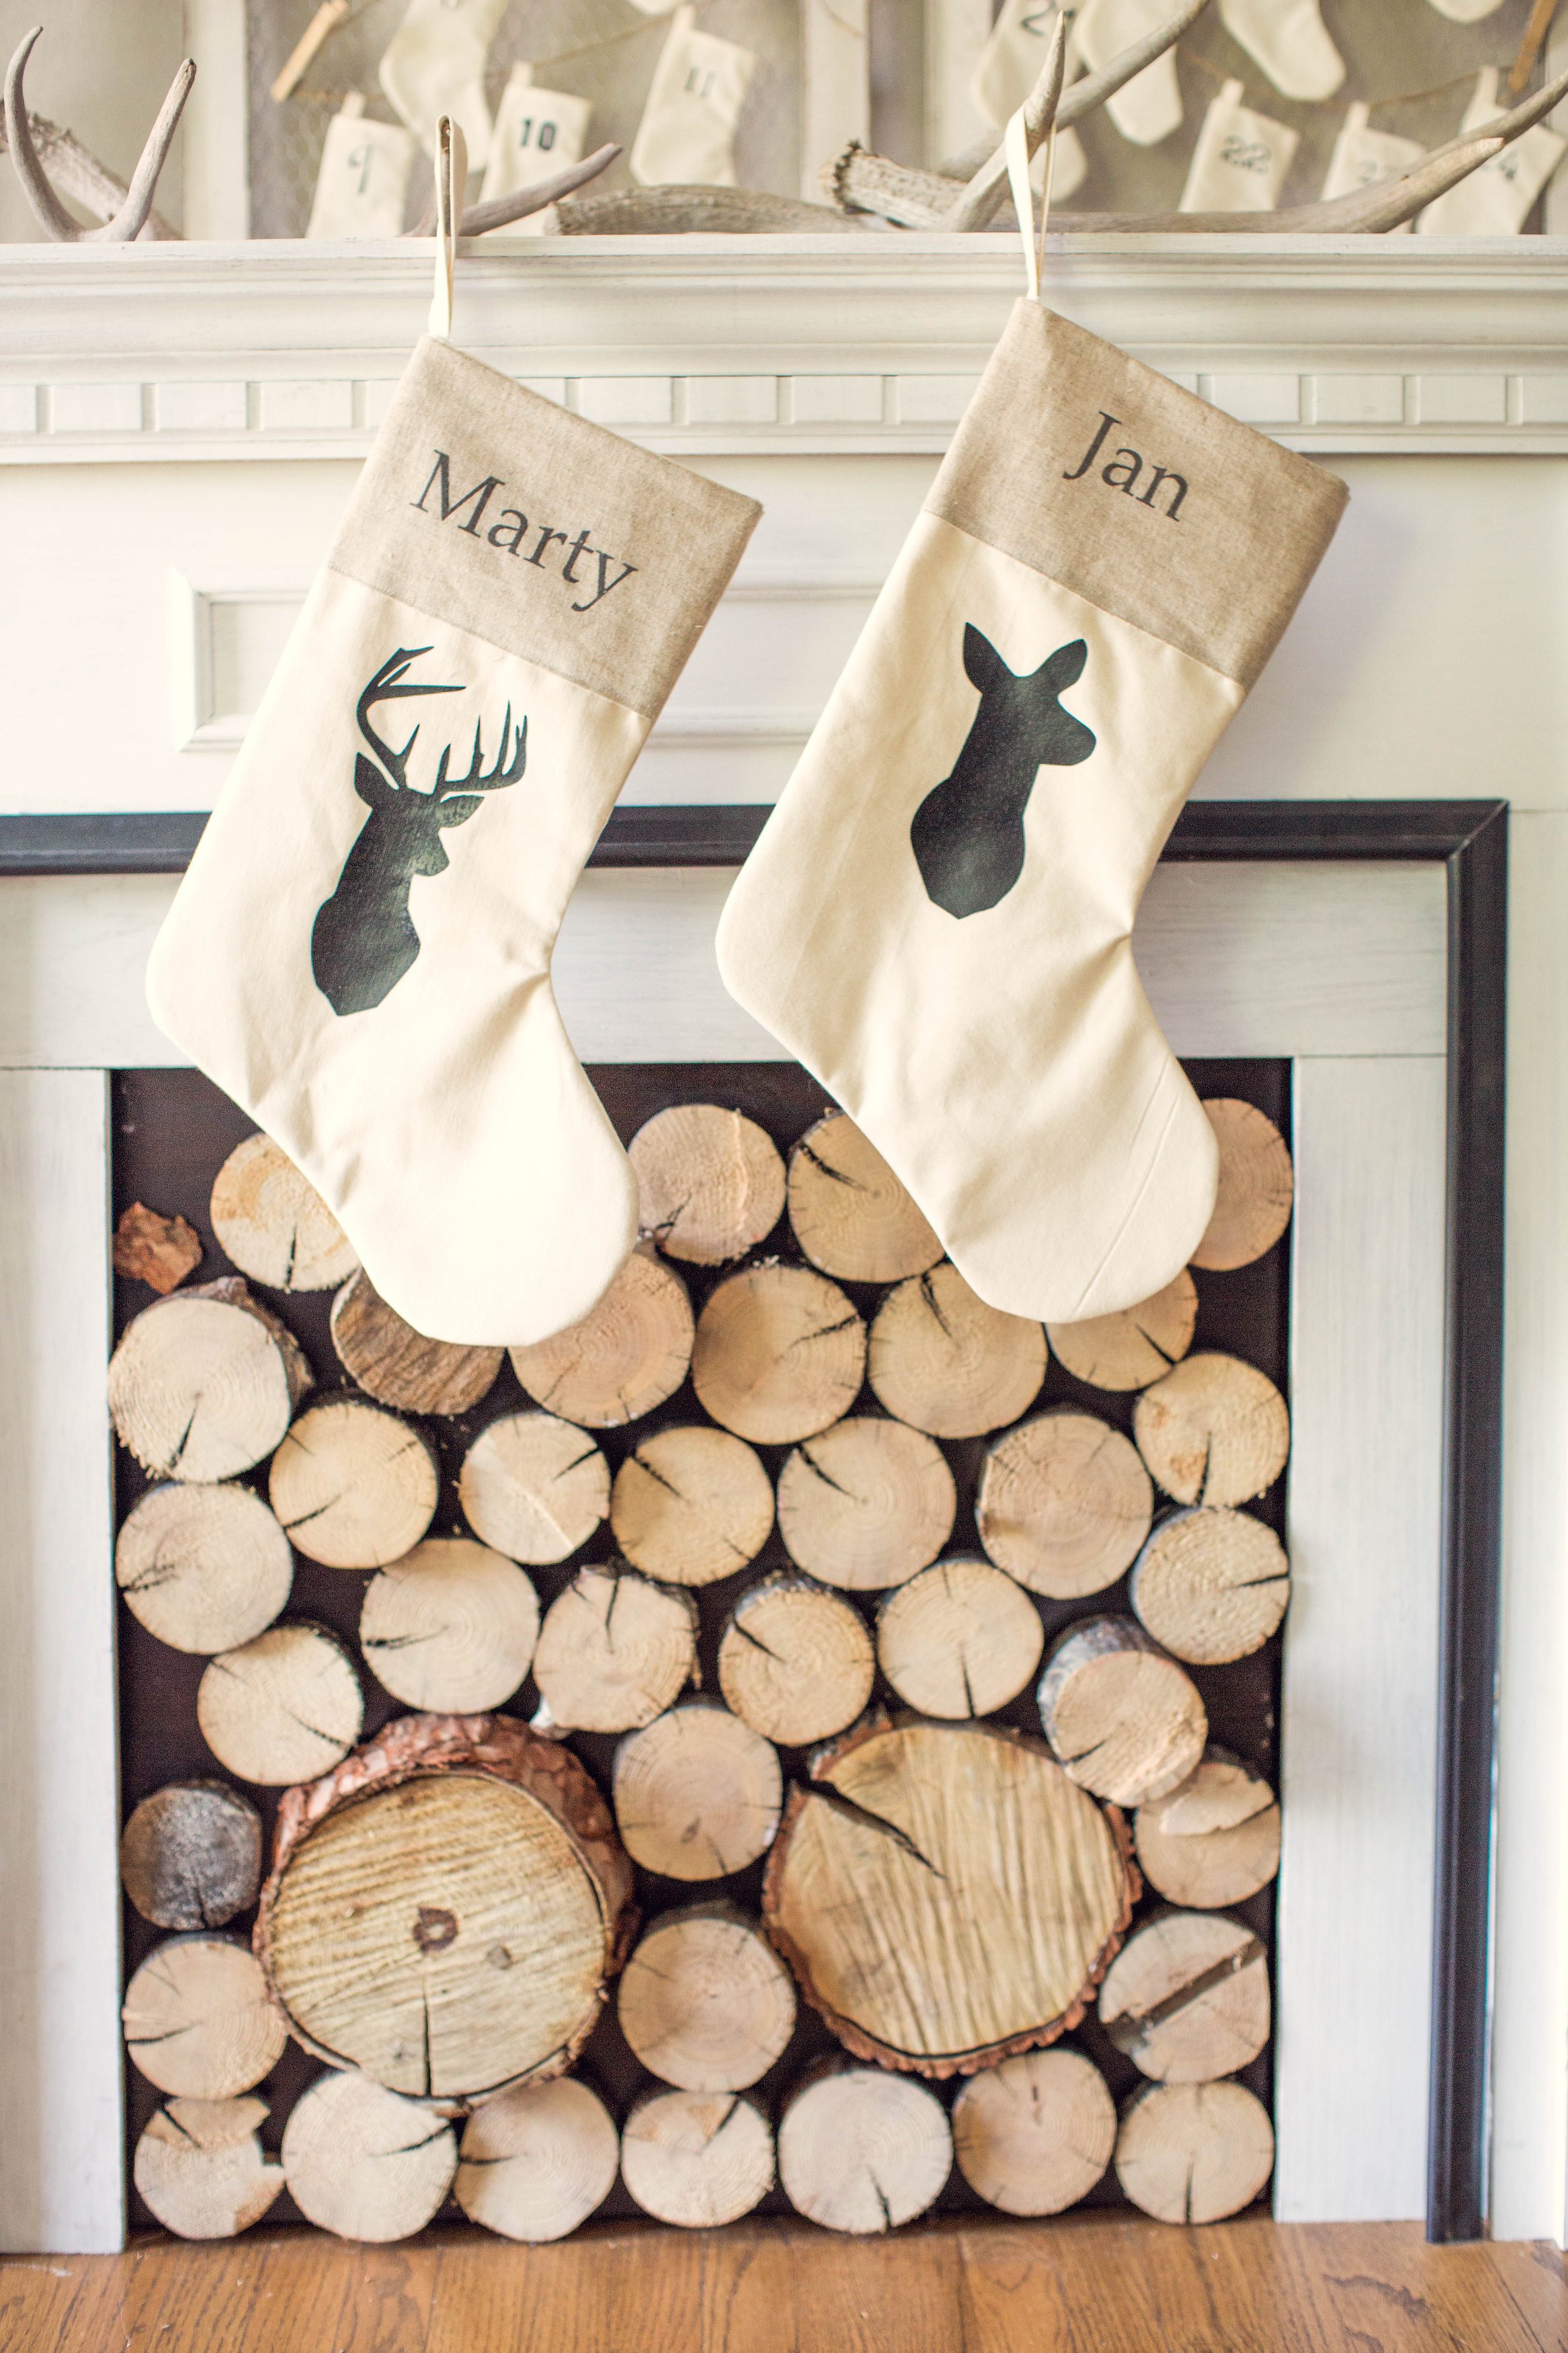 Do you have antlers lying on a mantel or a shelf? If so, they decorate your stockings with deer silhouettes and hang them on these antlers.